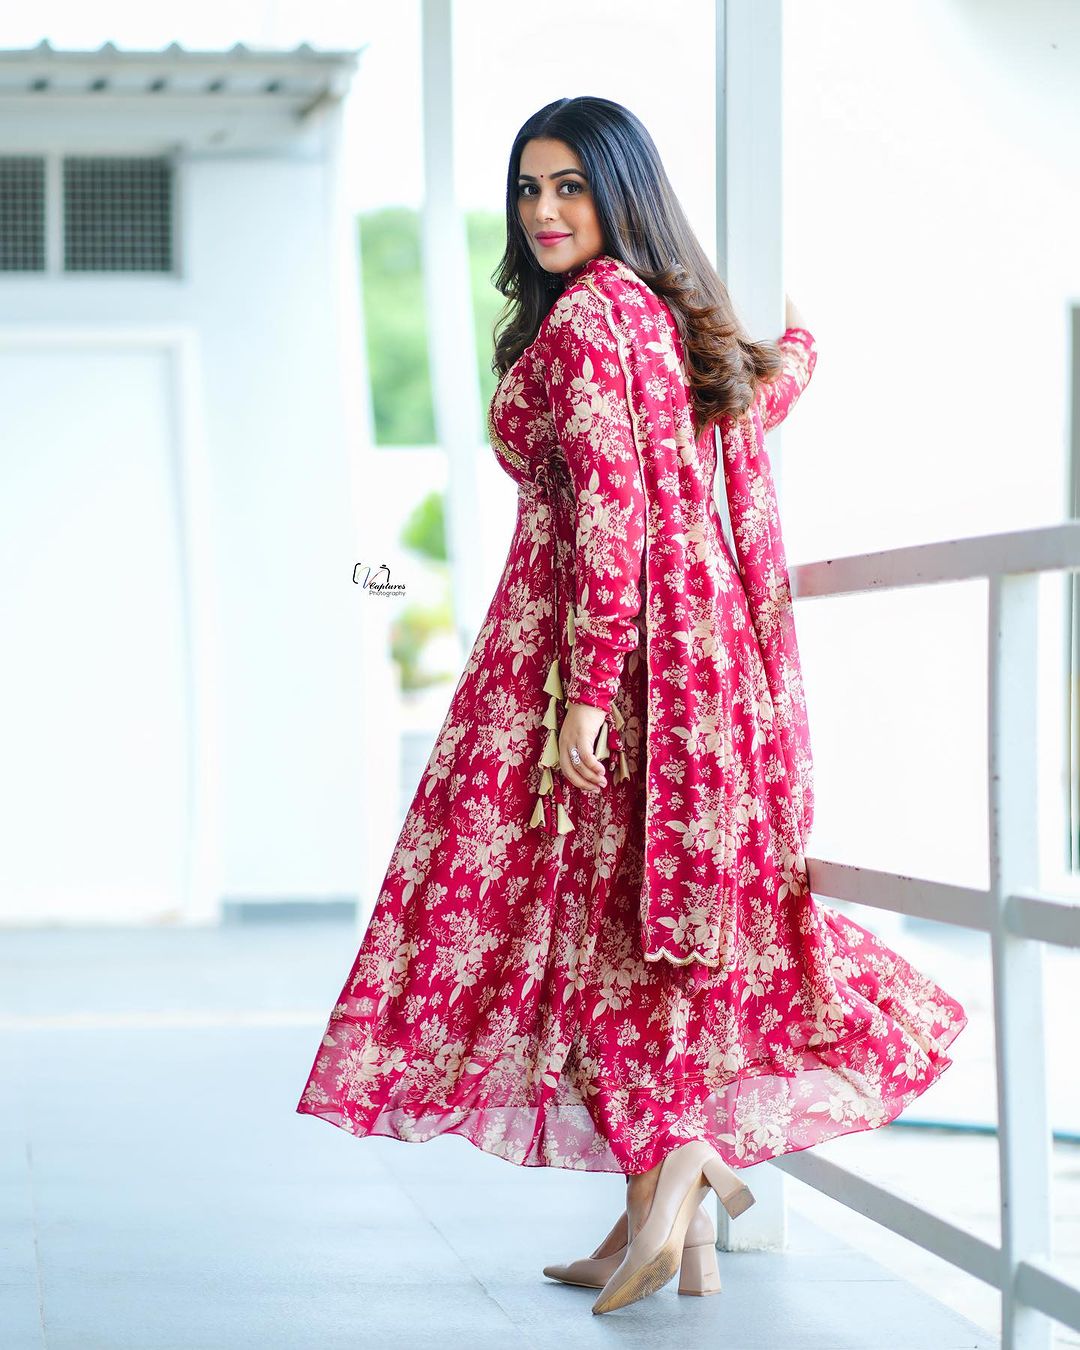 Actress poorna flaunts her beauty in this outfit-Actress Poorna, Actresspoorna, Poorna Photos,Spicy Hot Pics,Images,High Resolution WallPapers Download